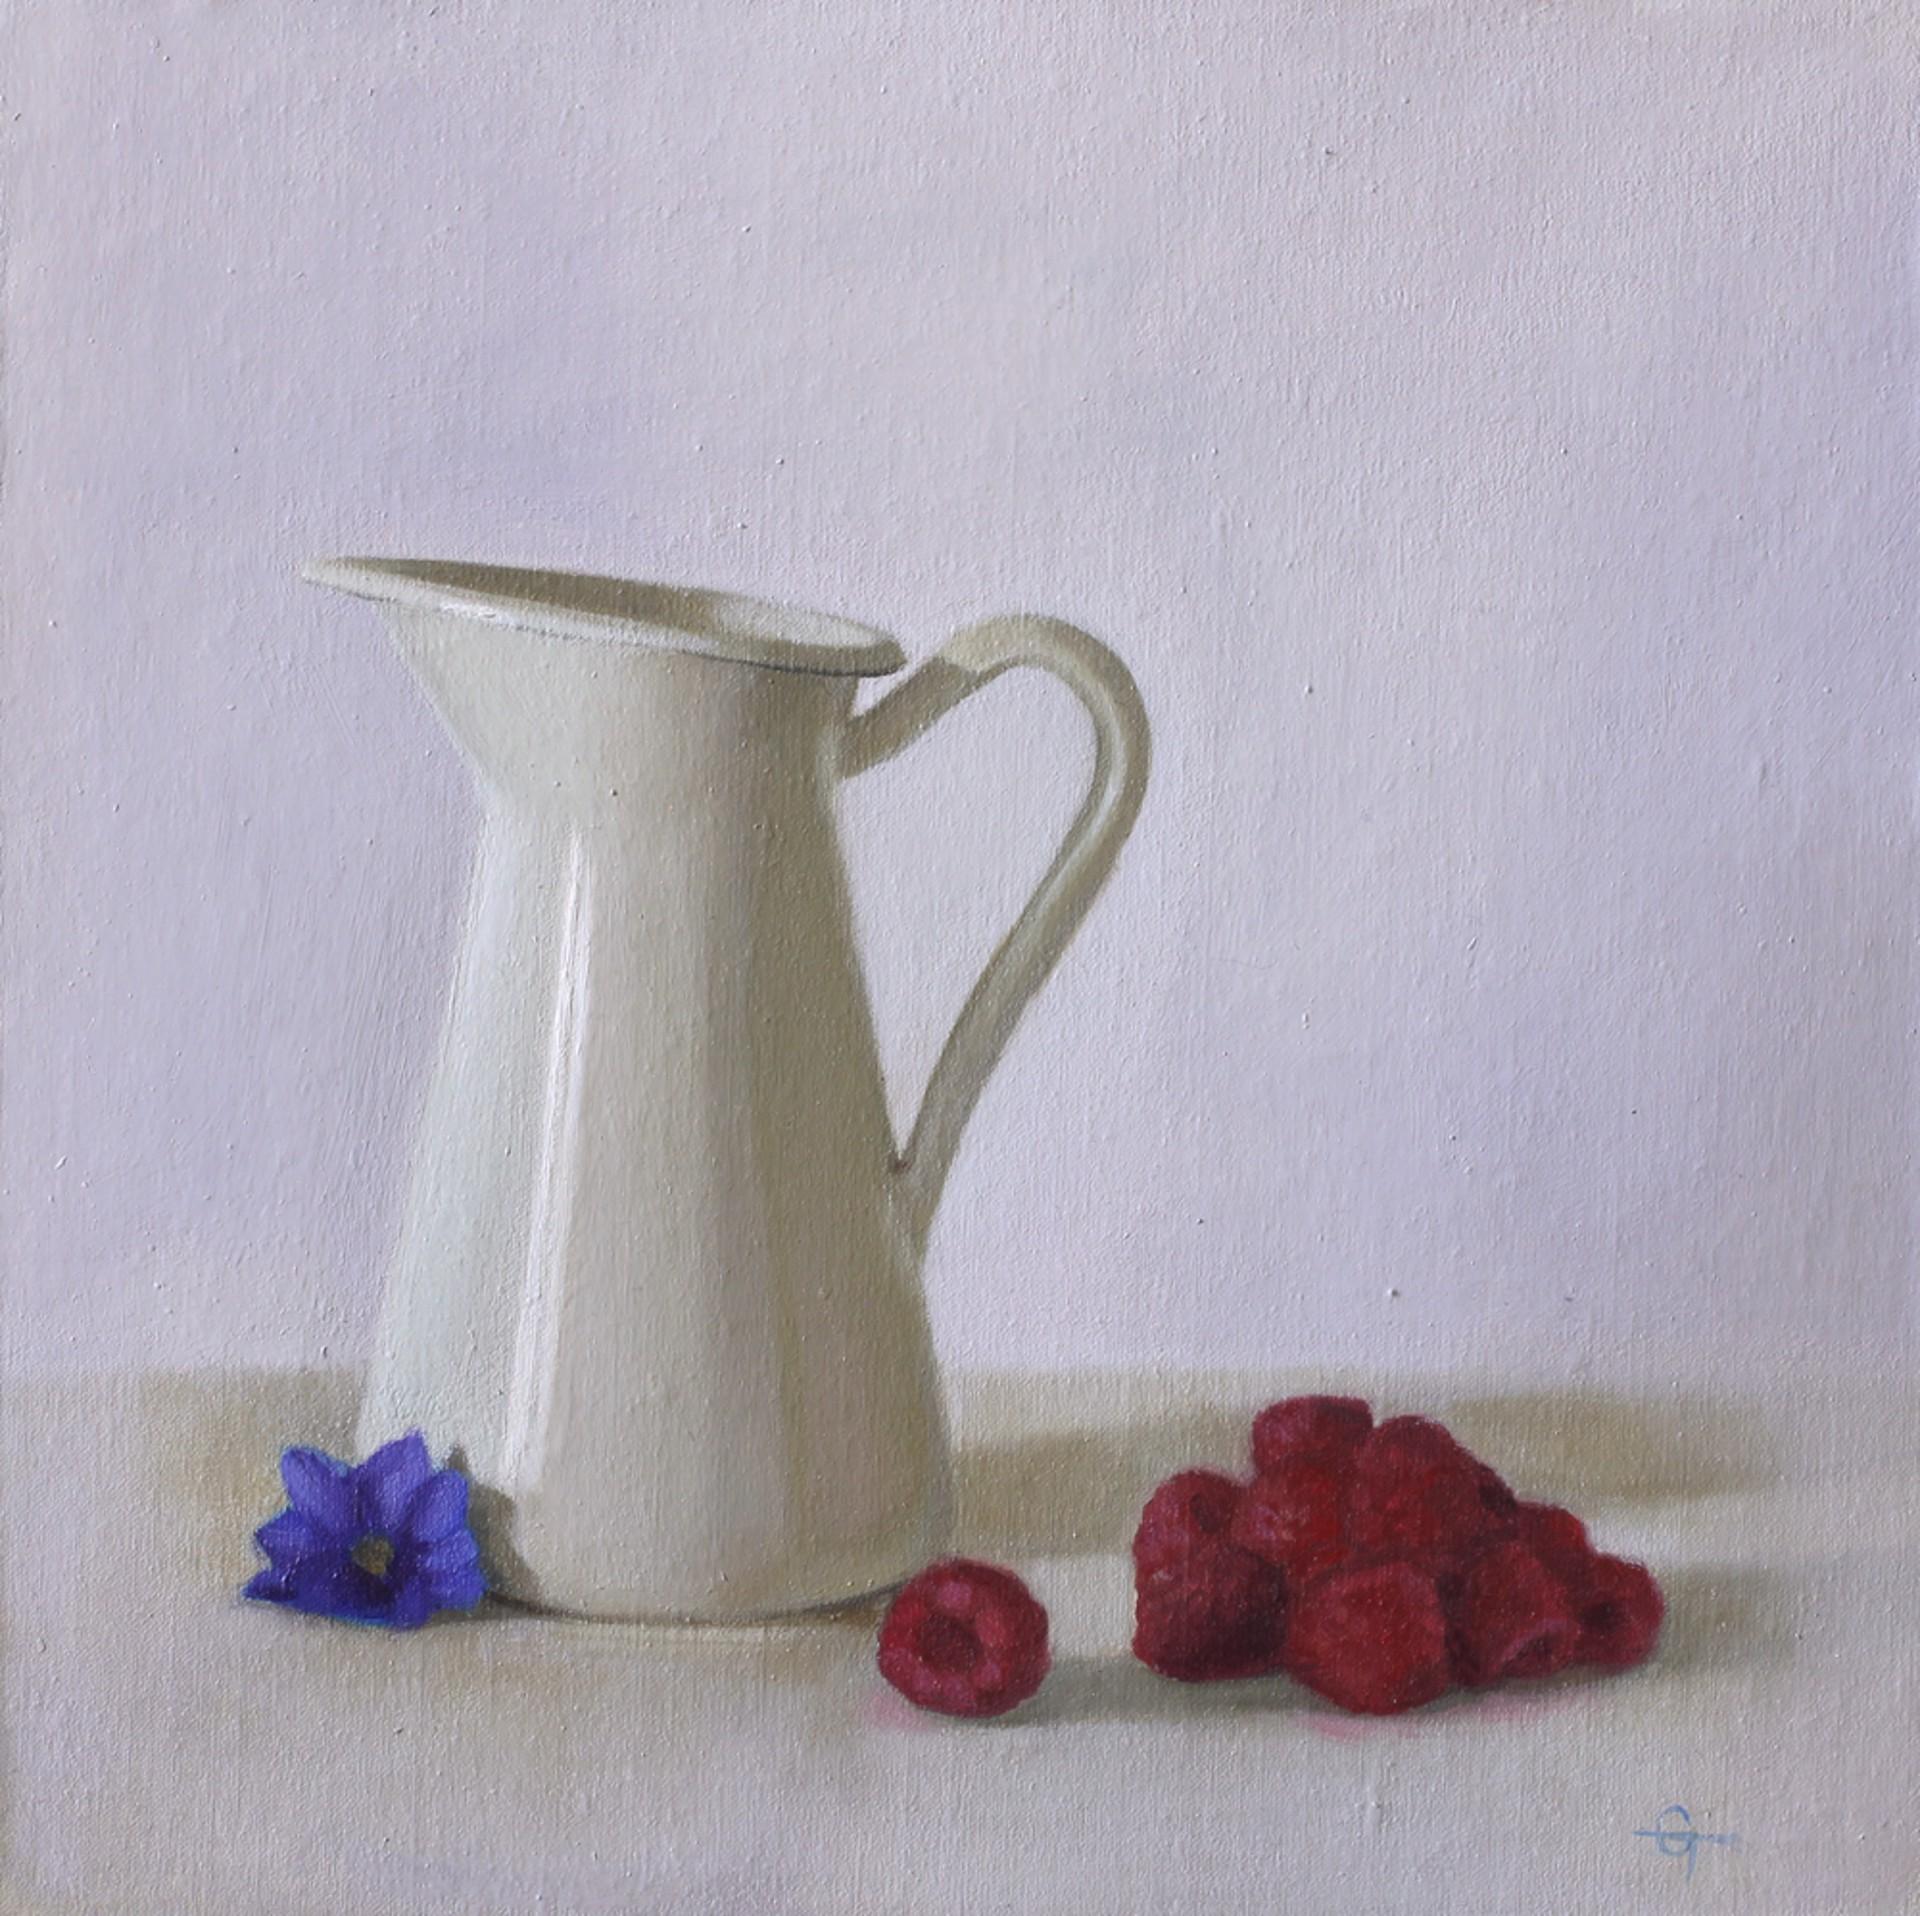 Raspberries and Cream - Art by Cecilia Thorell